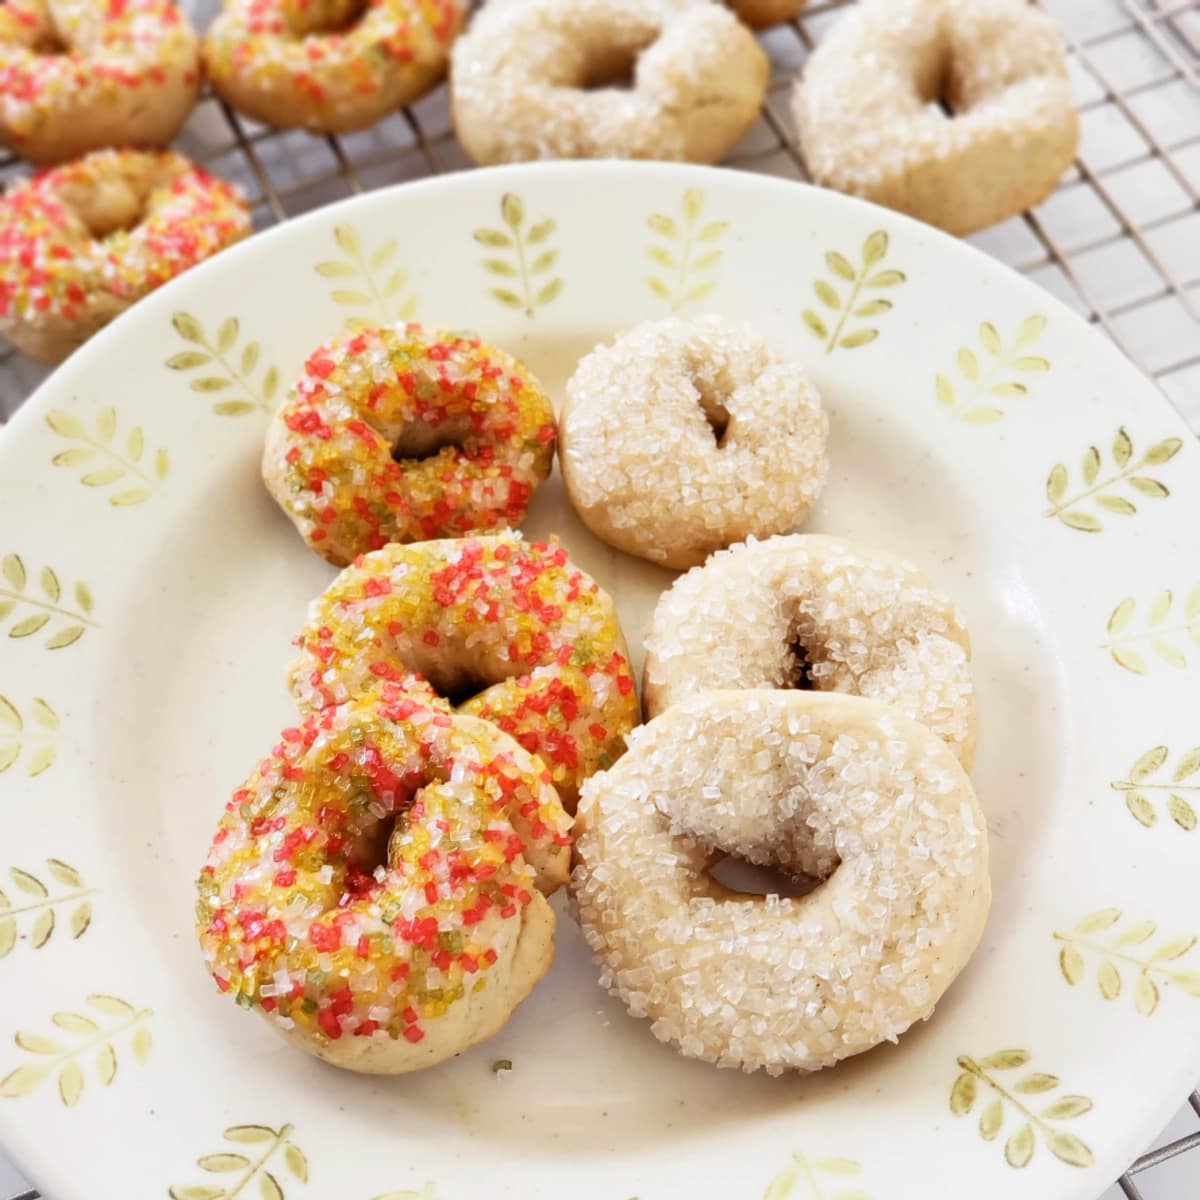 Donut-shaped cookies on a plate with additional cookies on a cooling rack in the background